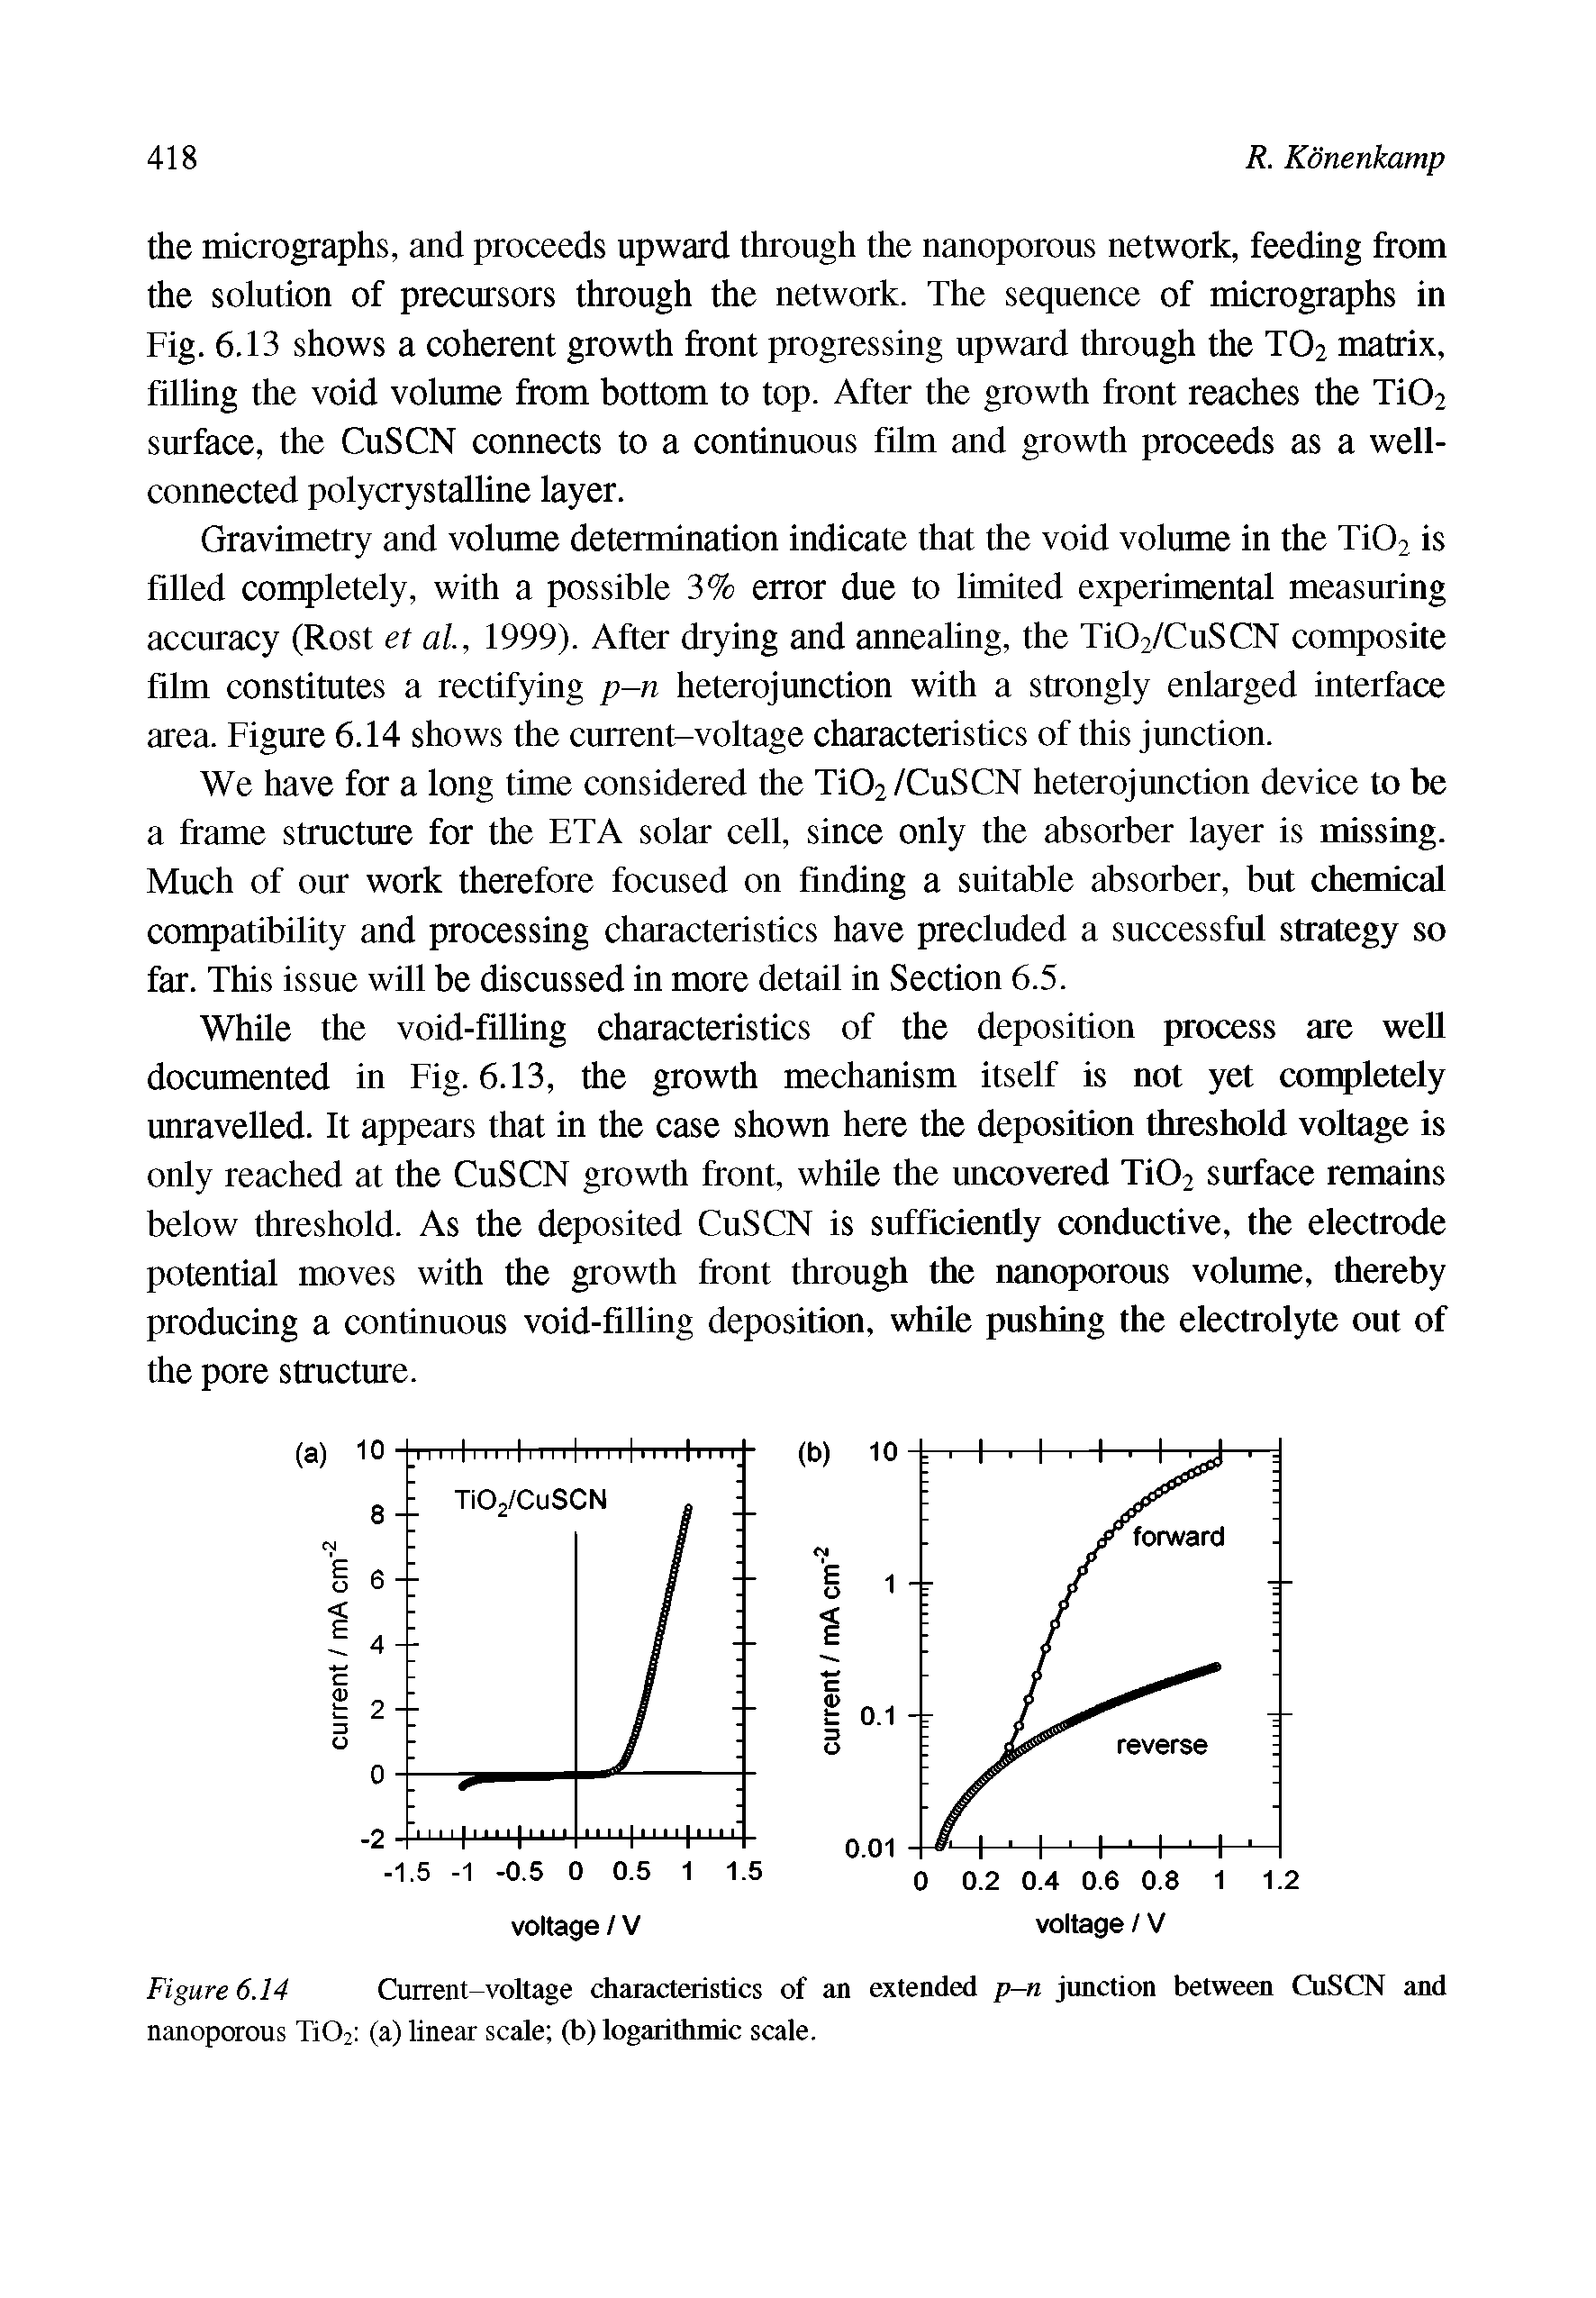 Figure 6.14 Current-voltage characteristics of an extended p-n junction between CuSCN and nanoporous Xi02 (a) linear scale (b) logarithmic scale.